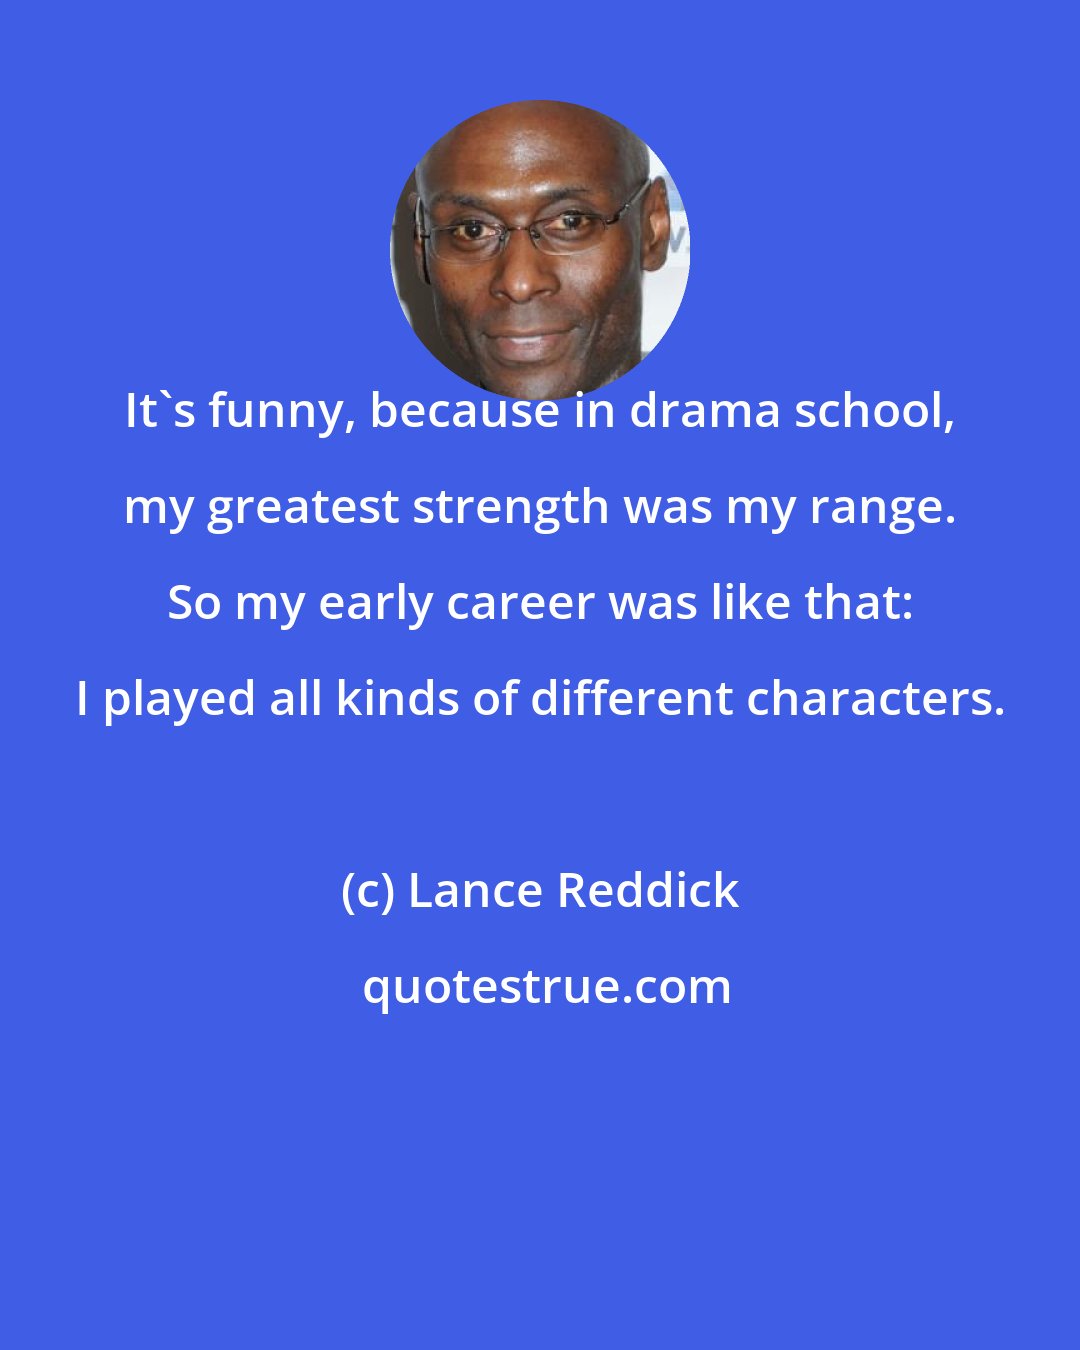 Lance Reddick: It's funny, because in drama school, my greatest strength was my range. So my early career was like that: I played all kinds of different characters.